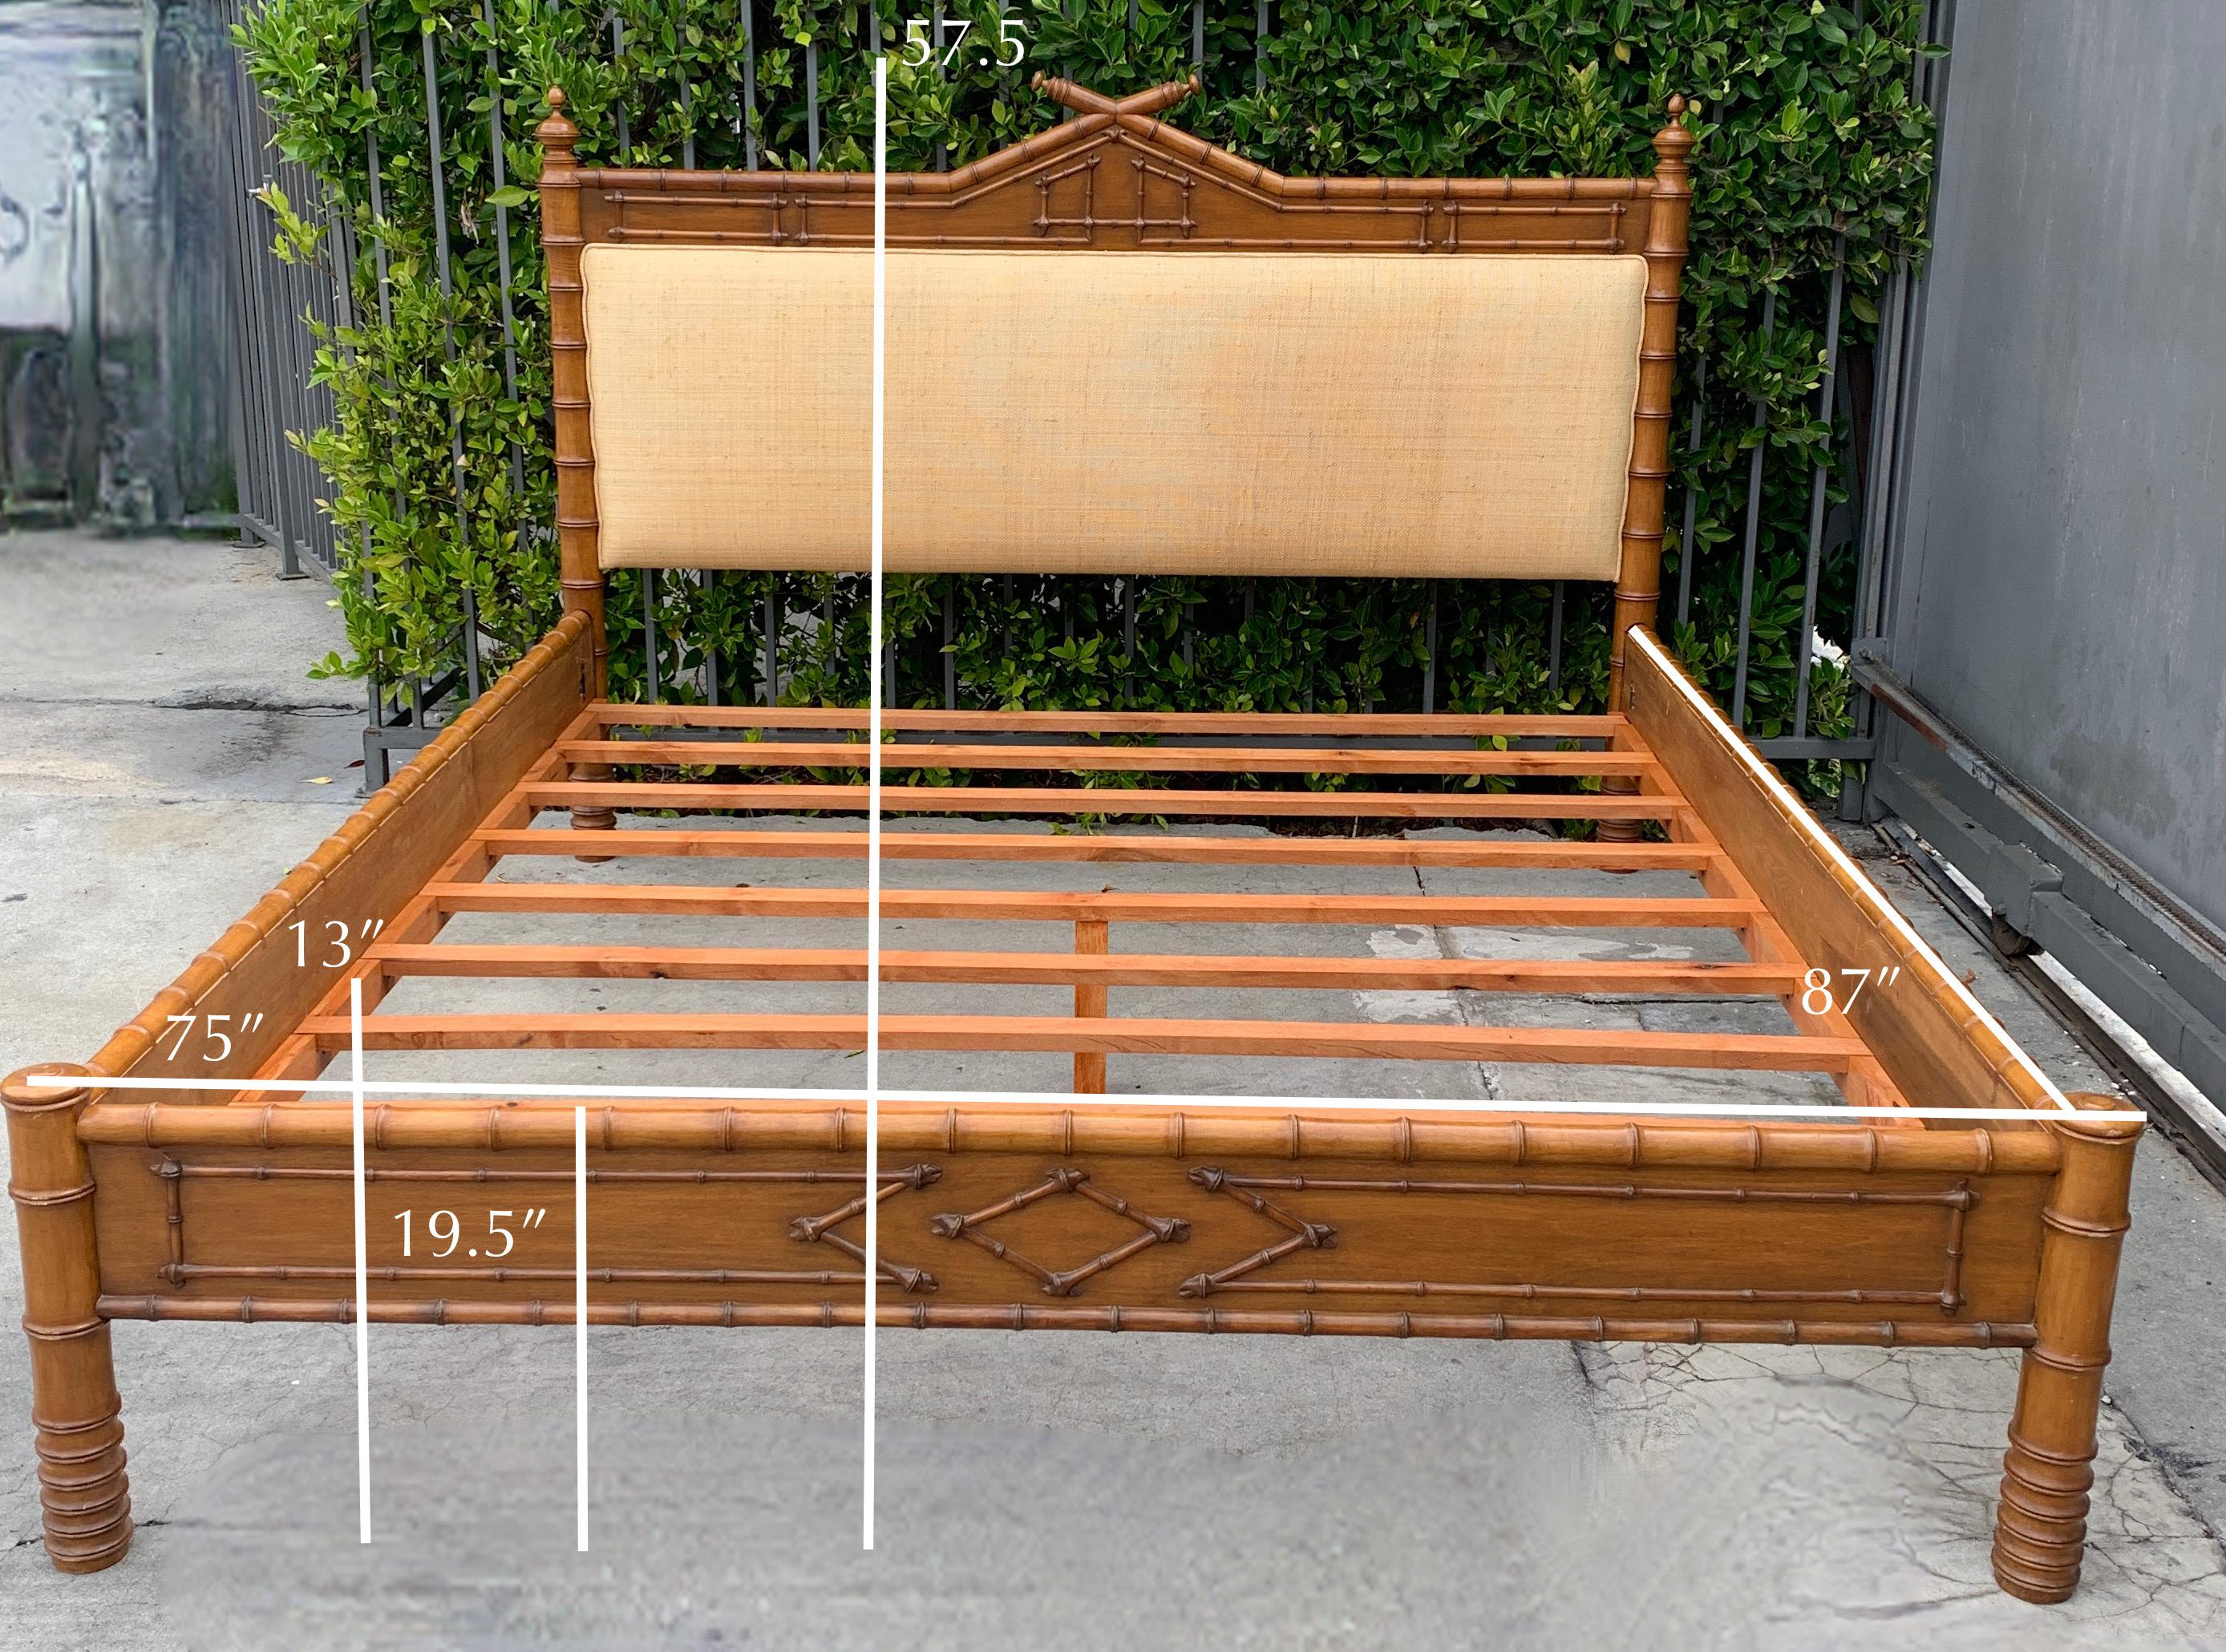 King size faux bamboo bed - a wonderfully designed colonial style bed - perfect compliment to any bedroom, or guest room. The hard to find King frame is very sturdy with an upholstered headboard in grass cloth / raffia. In wonderful condition and